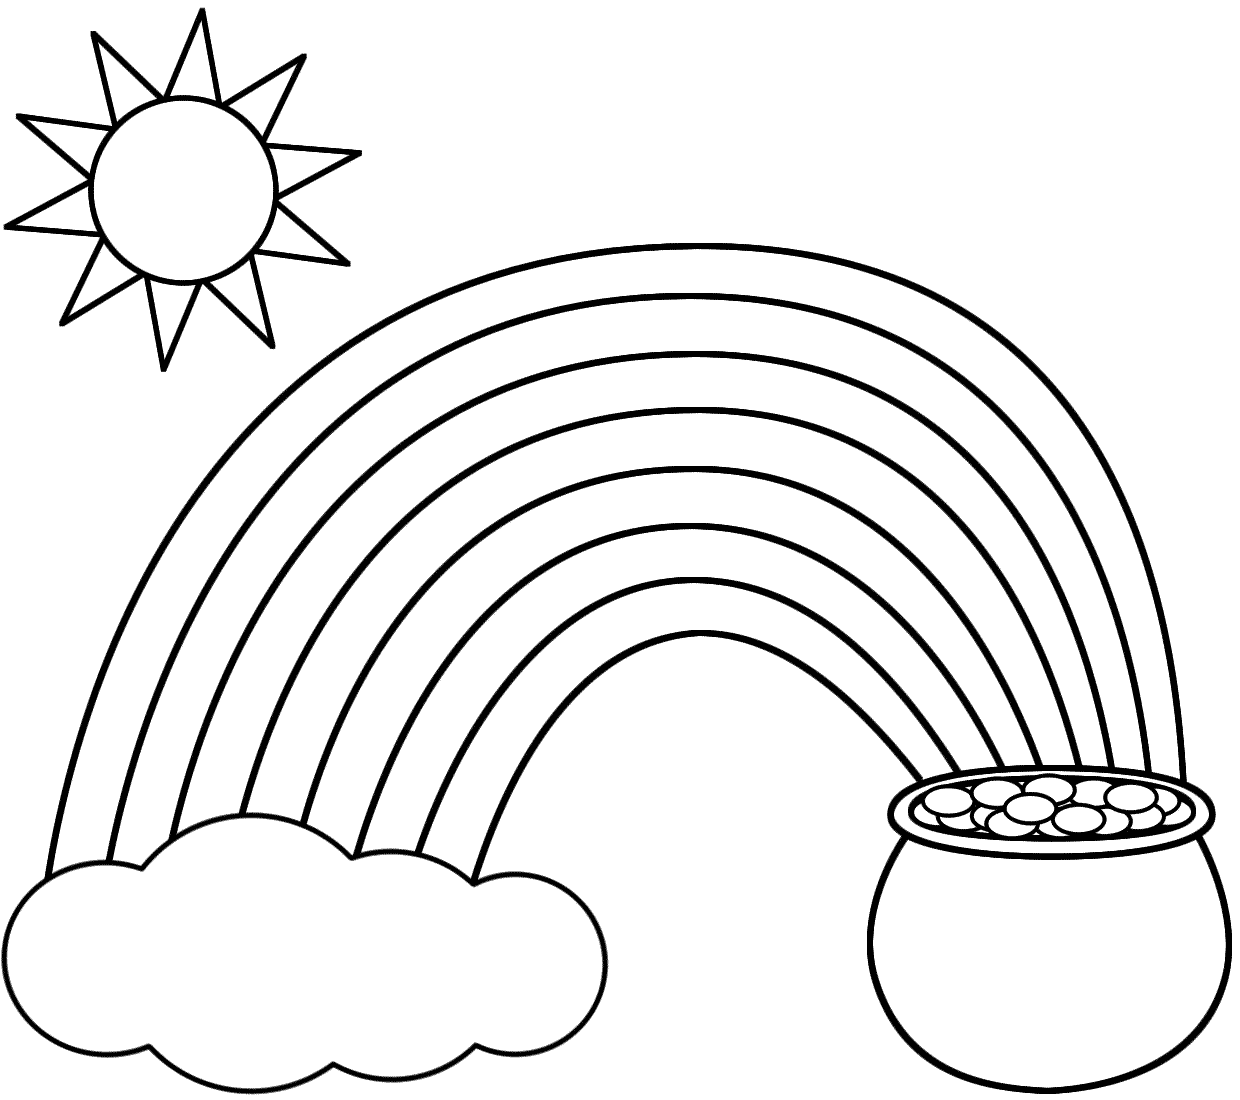 rainbow coloring book page